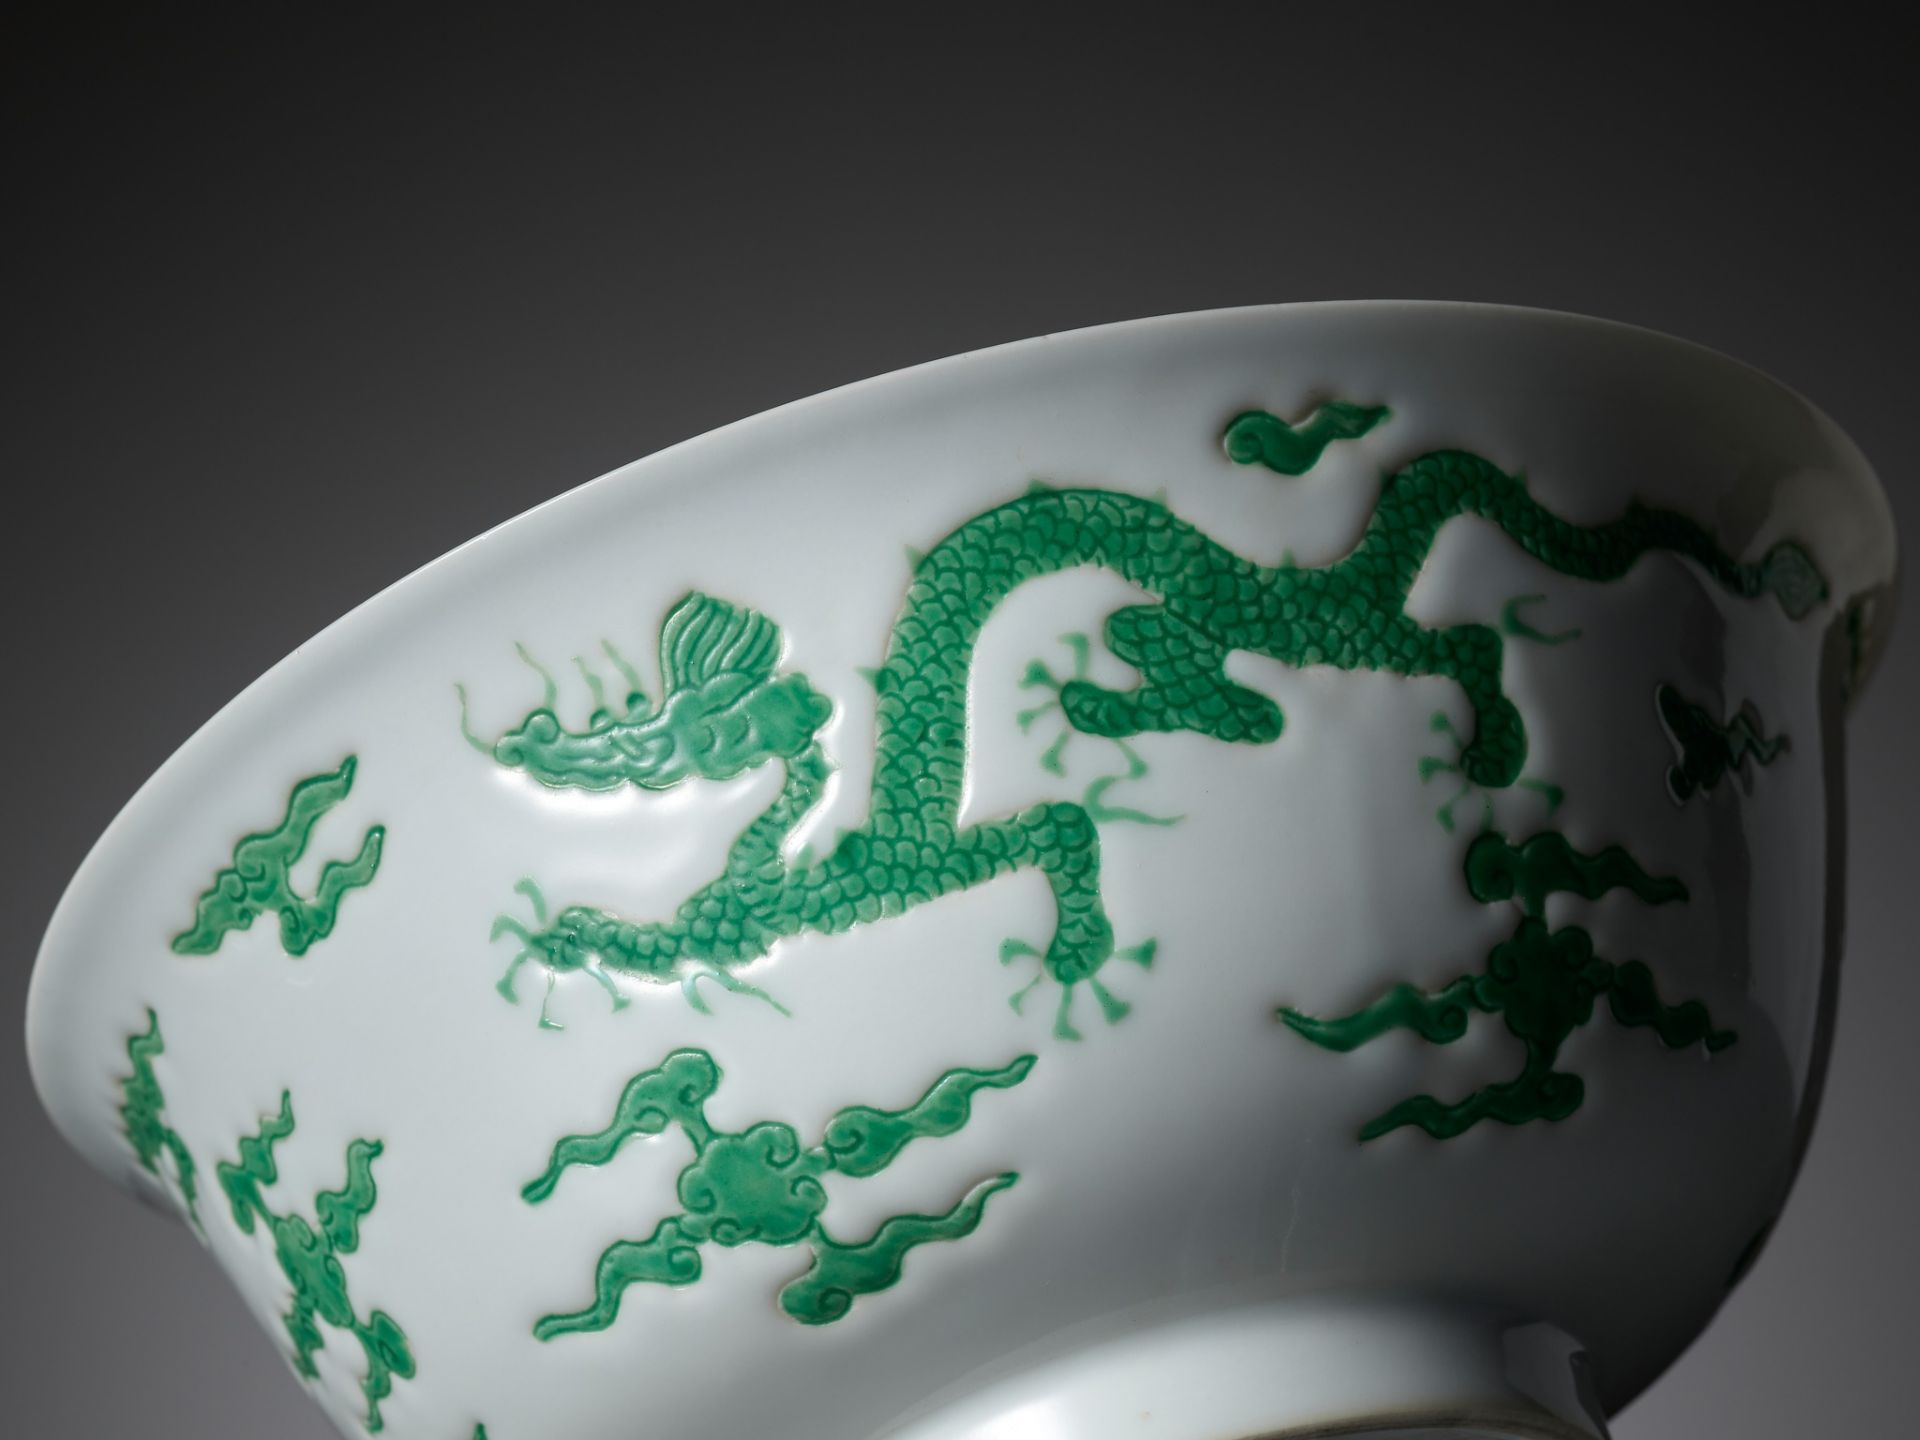 A RARE PAIR OF MING-STYLE GREEN-ENAMELED 'DRAGON' BOWLS, KANGXI PERIOD - Image 2 of 18